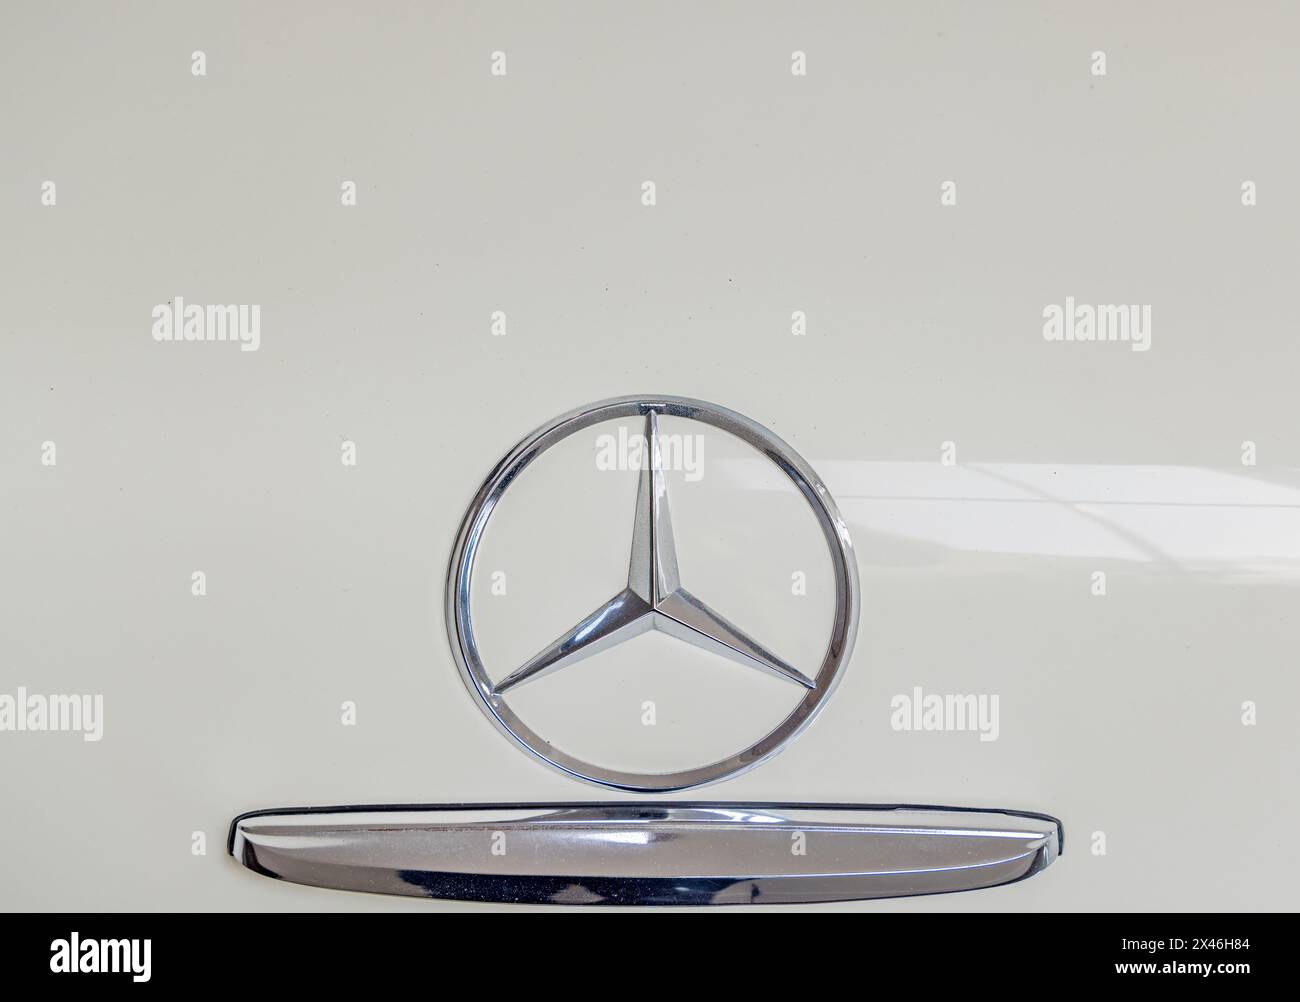 detail image of a three pointed silver star on a 280 sl mercedes's trunk Stock Photo